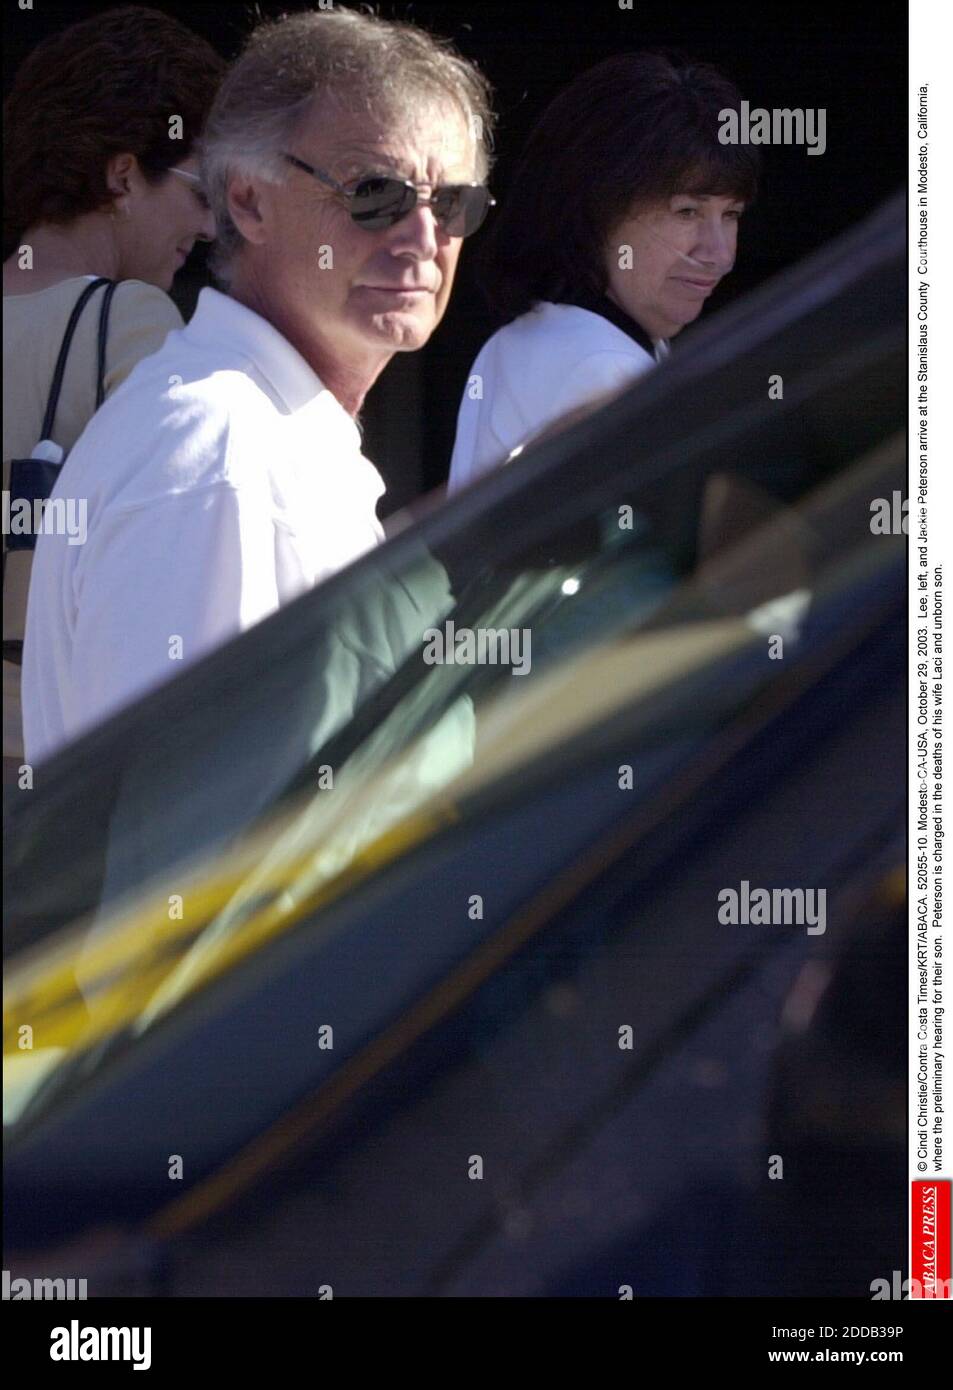 NO FILM, NO VIDEO, NO TV, NO DOCUMENTARY - © Cindi Christie/Contra Costa Times/KRT/ABACA. 52055-10. Modesto-CA-USA, October 29, 2003. Lee, left, and Jackie Peterson arrive at the Stanislaus County Courthouse in Modesto, California, where the preliminary hearing for their son. Peterson is charged i Stock Photo